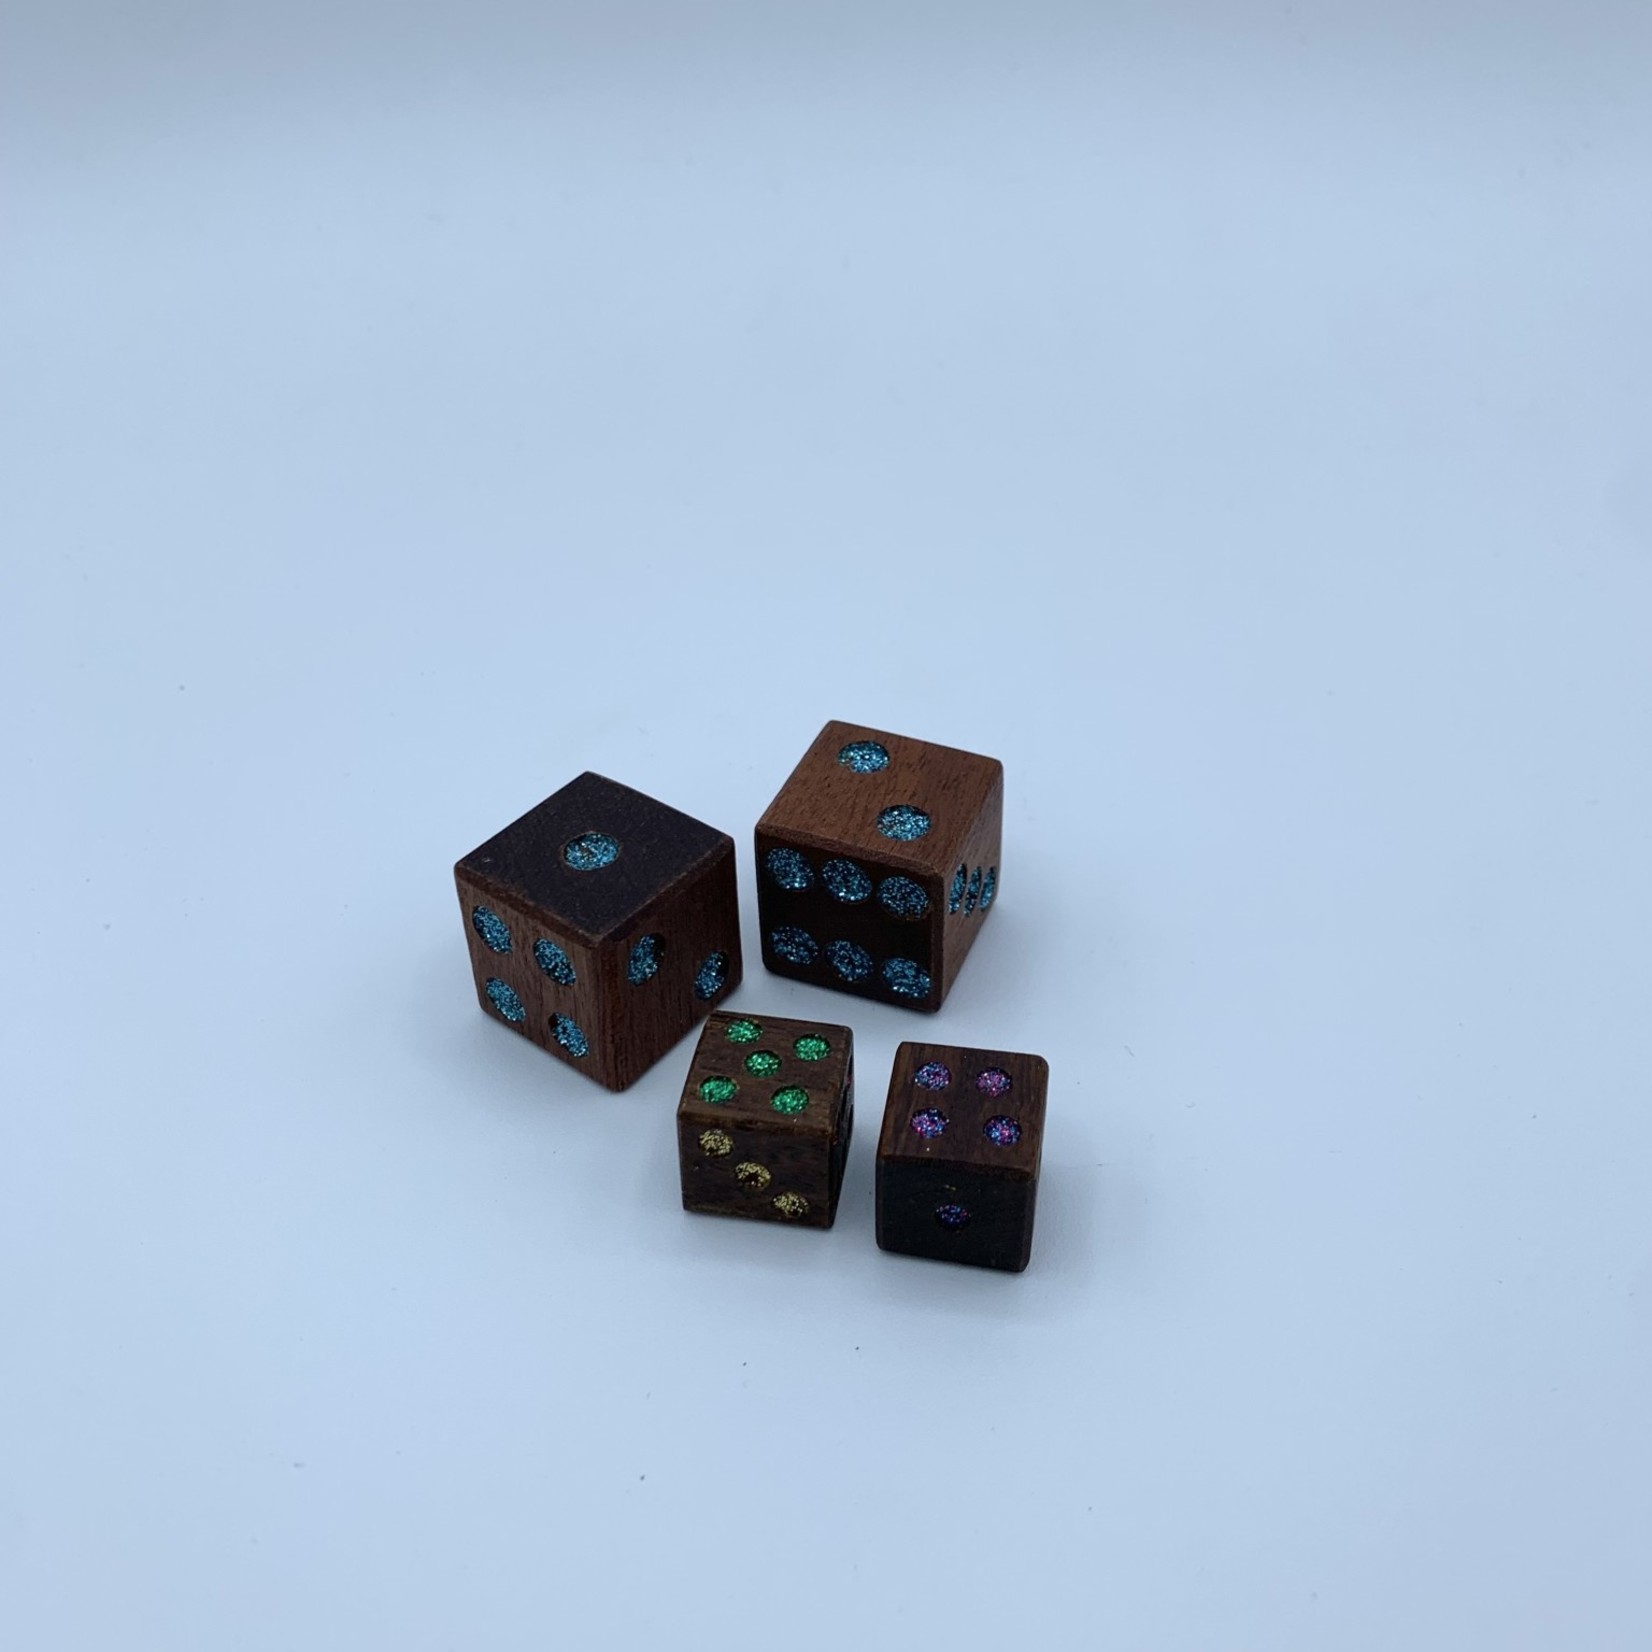 Buy Dice with best offers